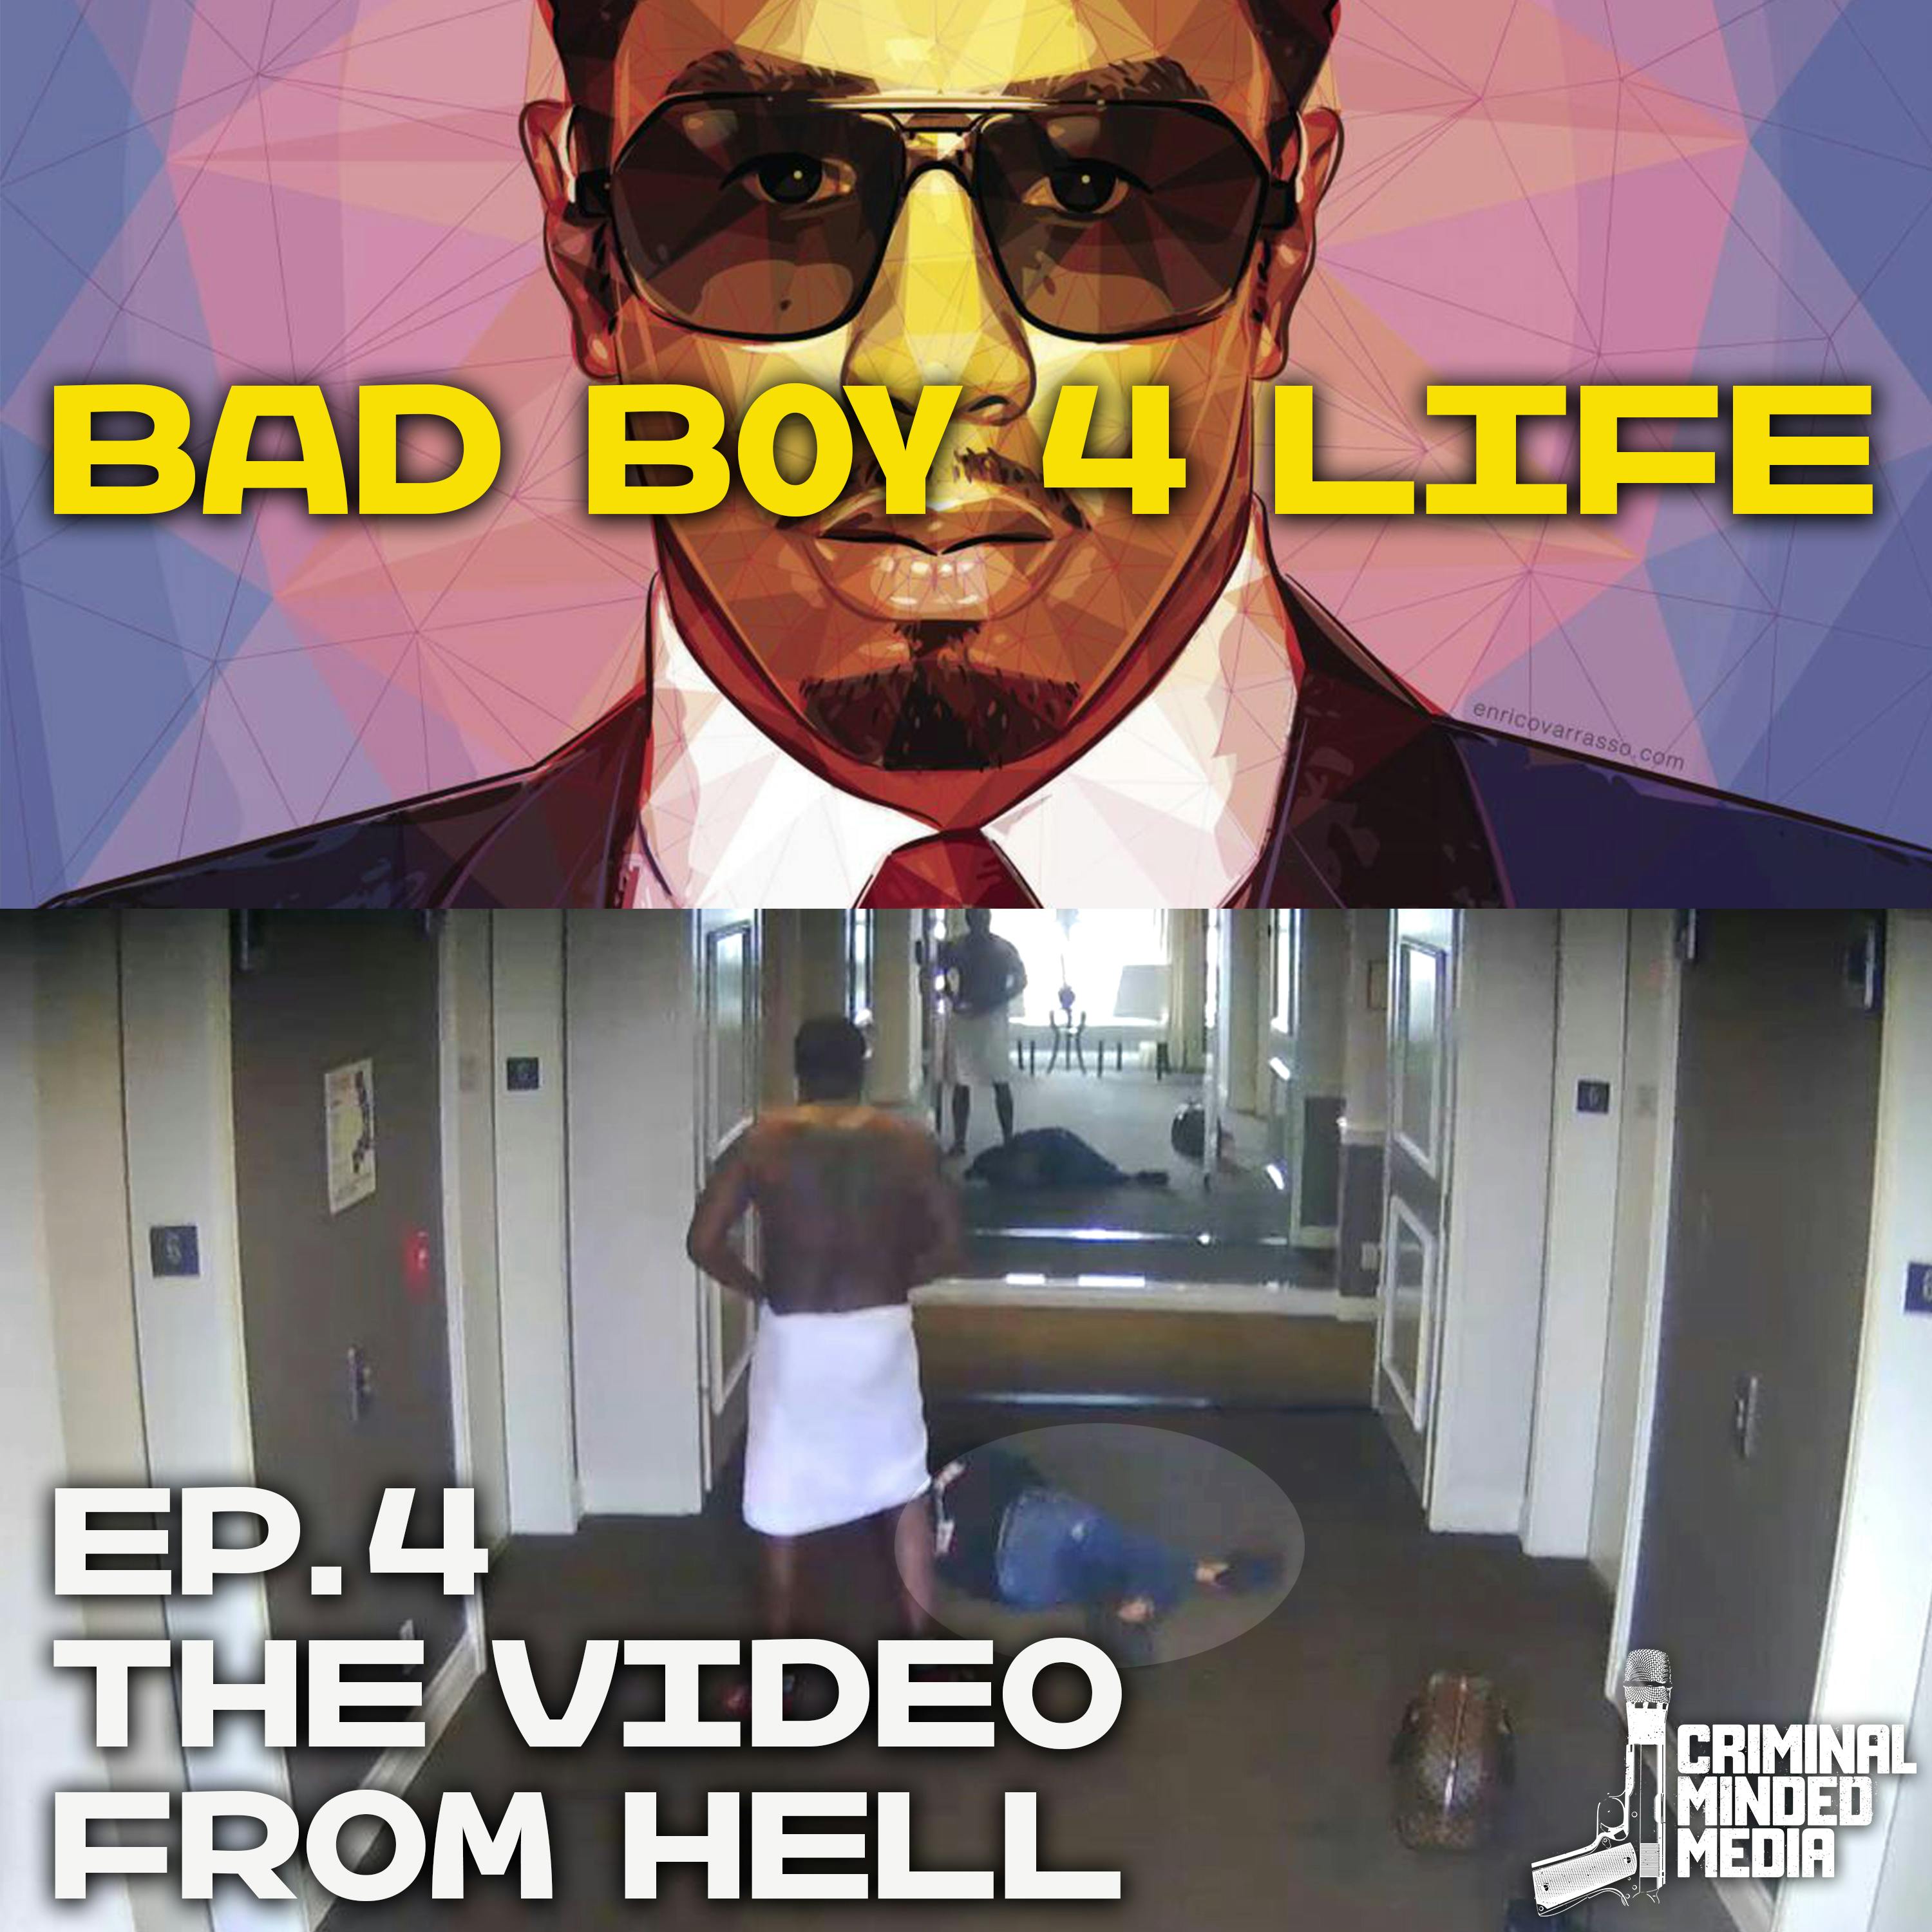 BAD BOY 4 LIFE EP. 4: THE VIDEO FROM HELL